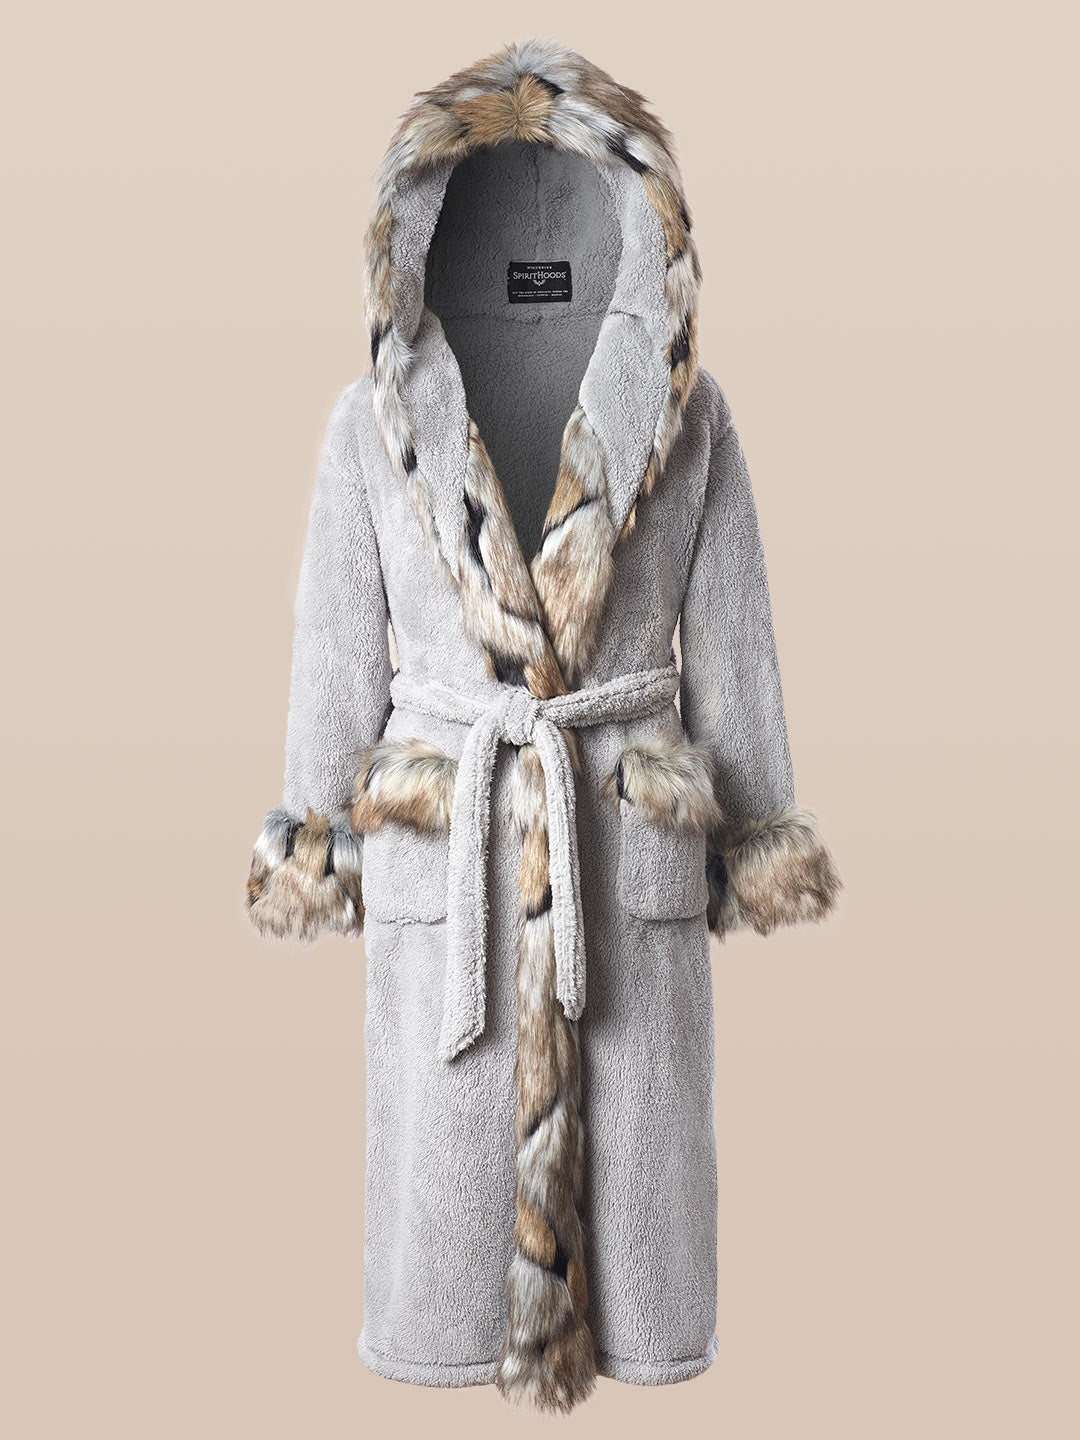 Exterior and Interior View of Wolverine Hooded Faux Fur Robe